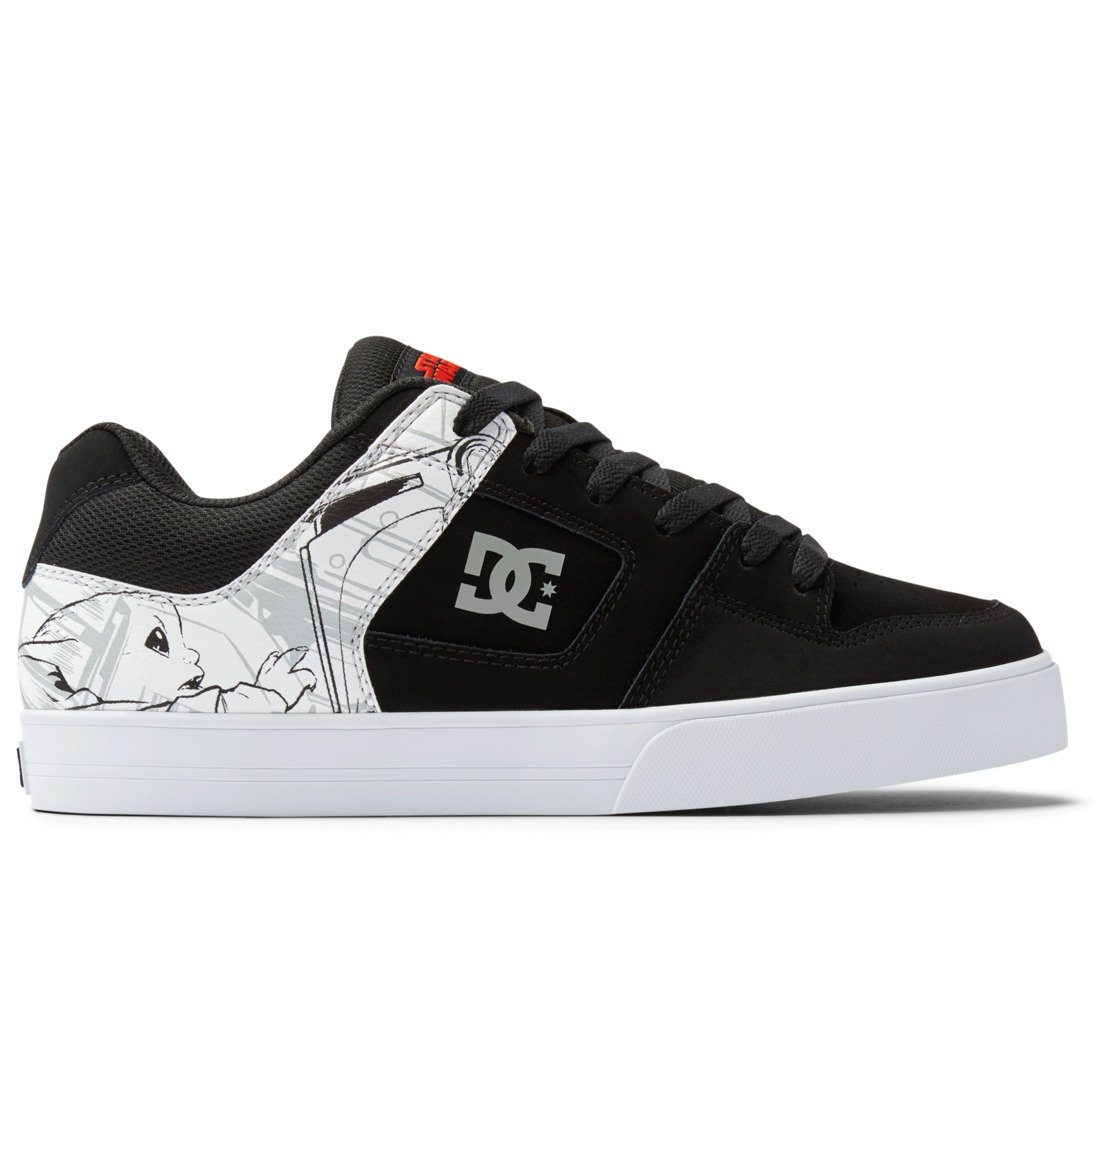 Wars Star DC DC Sneaker X Shoes Pure